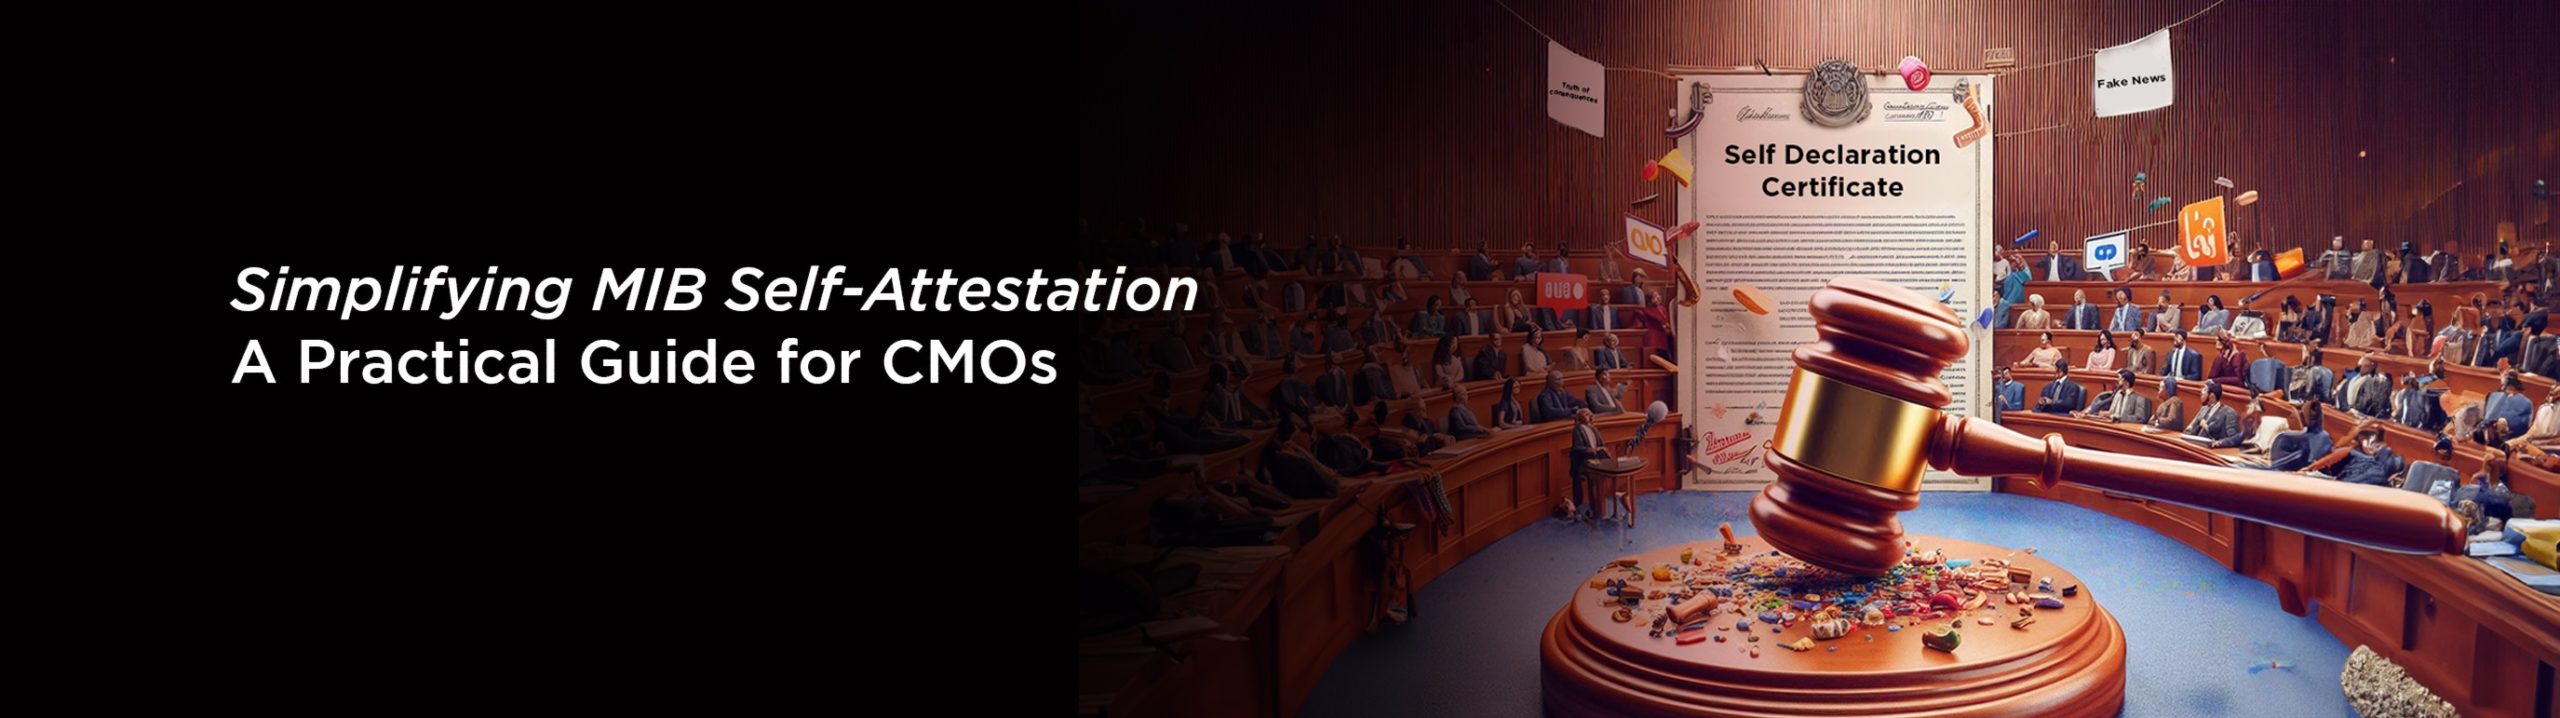 Simplifying MIB Self-Attestation: A Practical Guide for CMOs